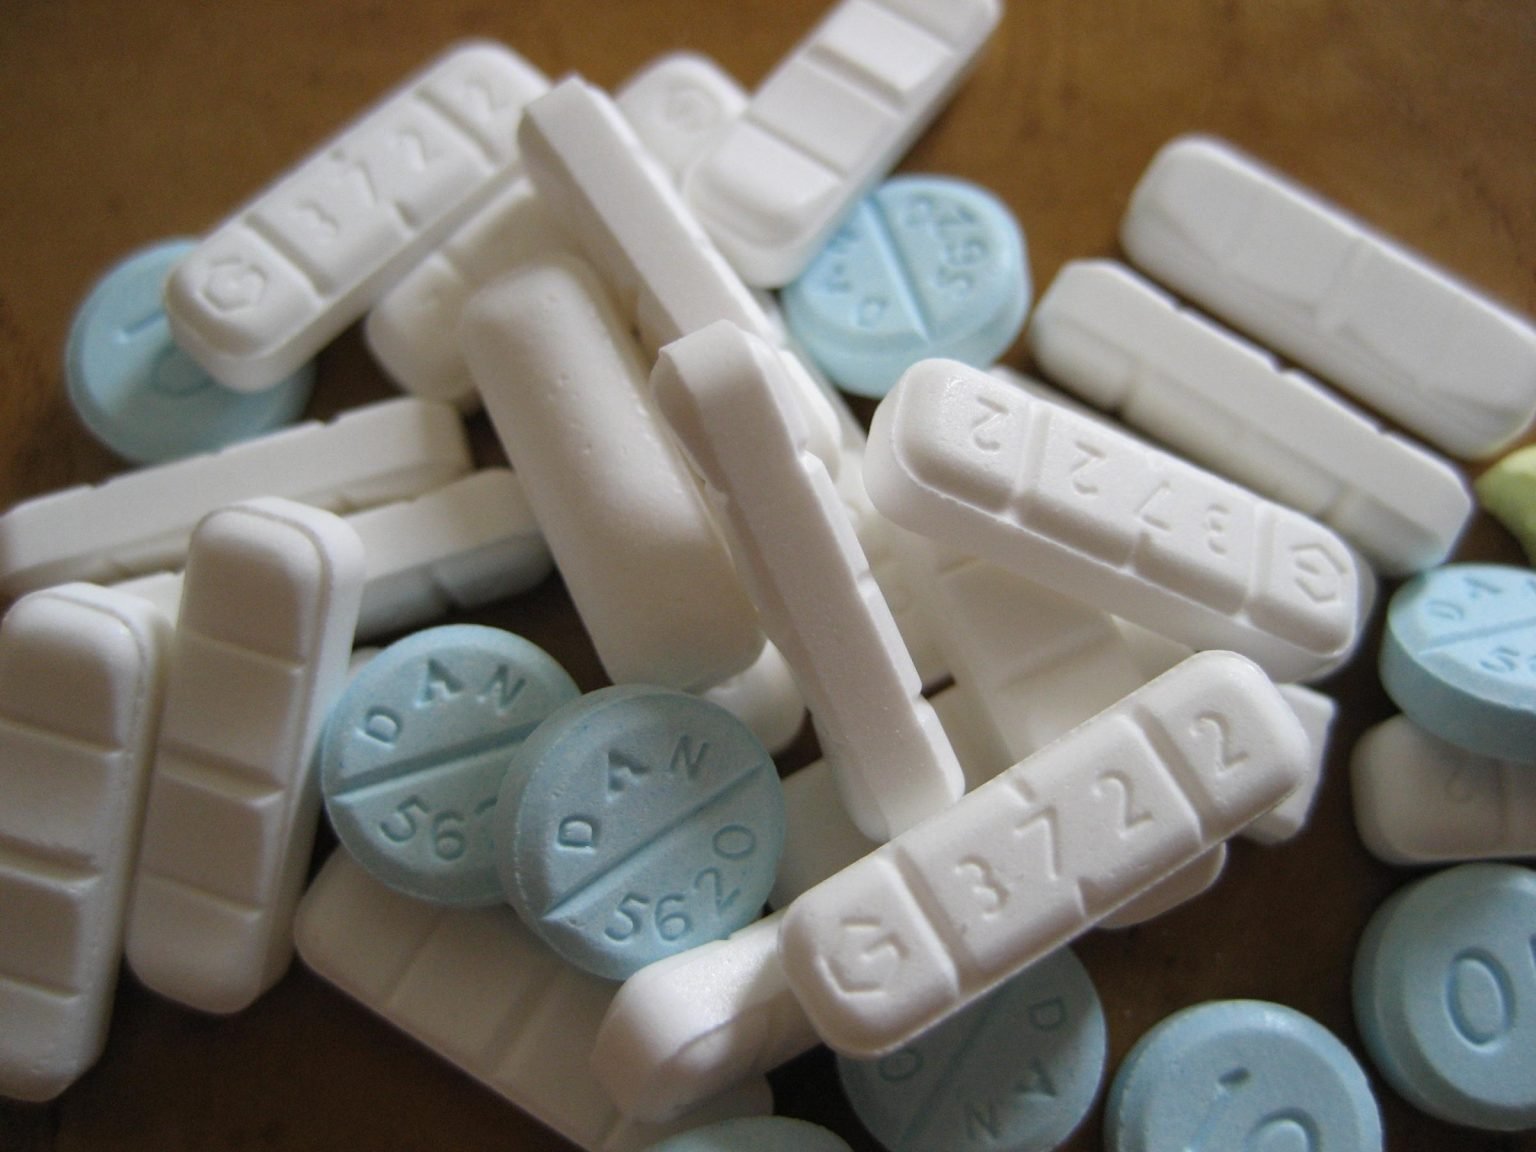 buy xanax online without a prescription